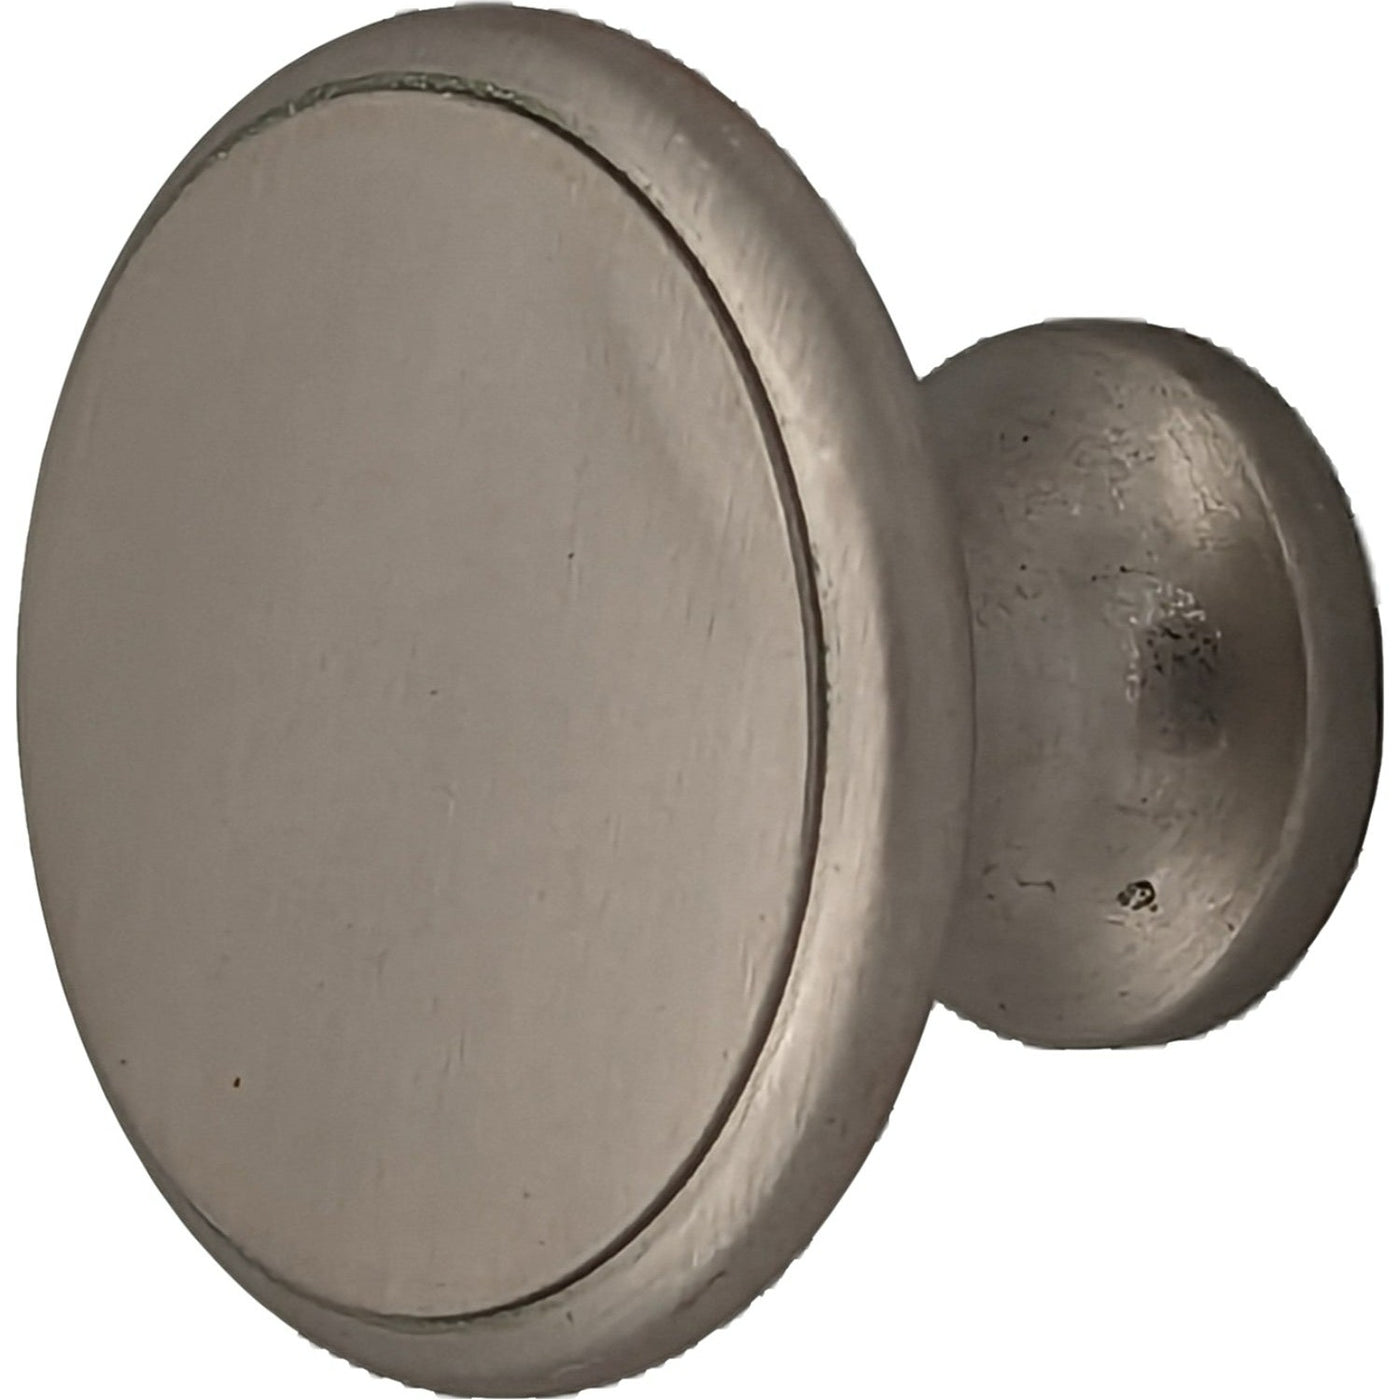 1 1/2 Inch Brass Flat Top Cabinet Knob (Several Finishes Available)